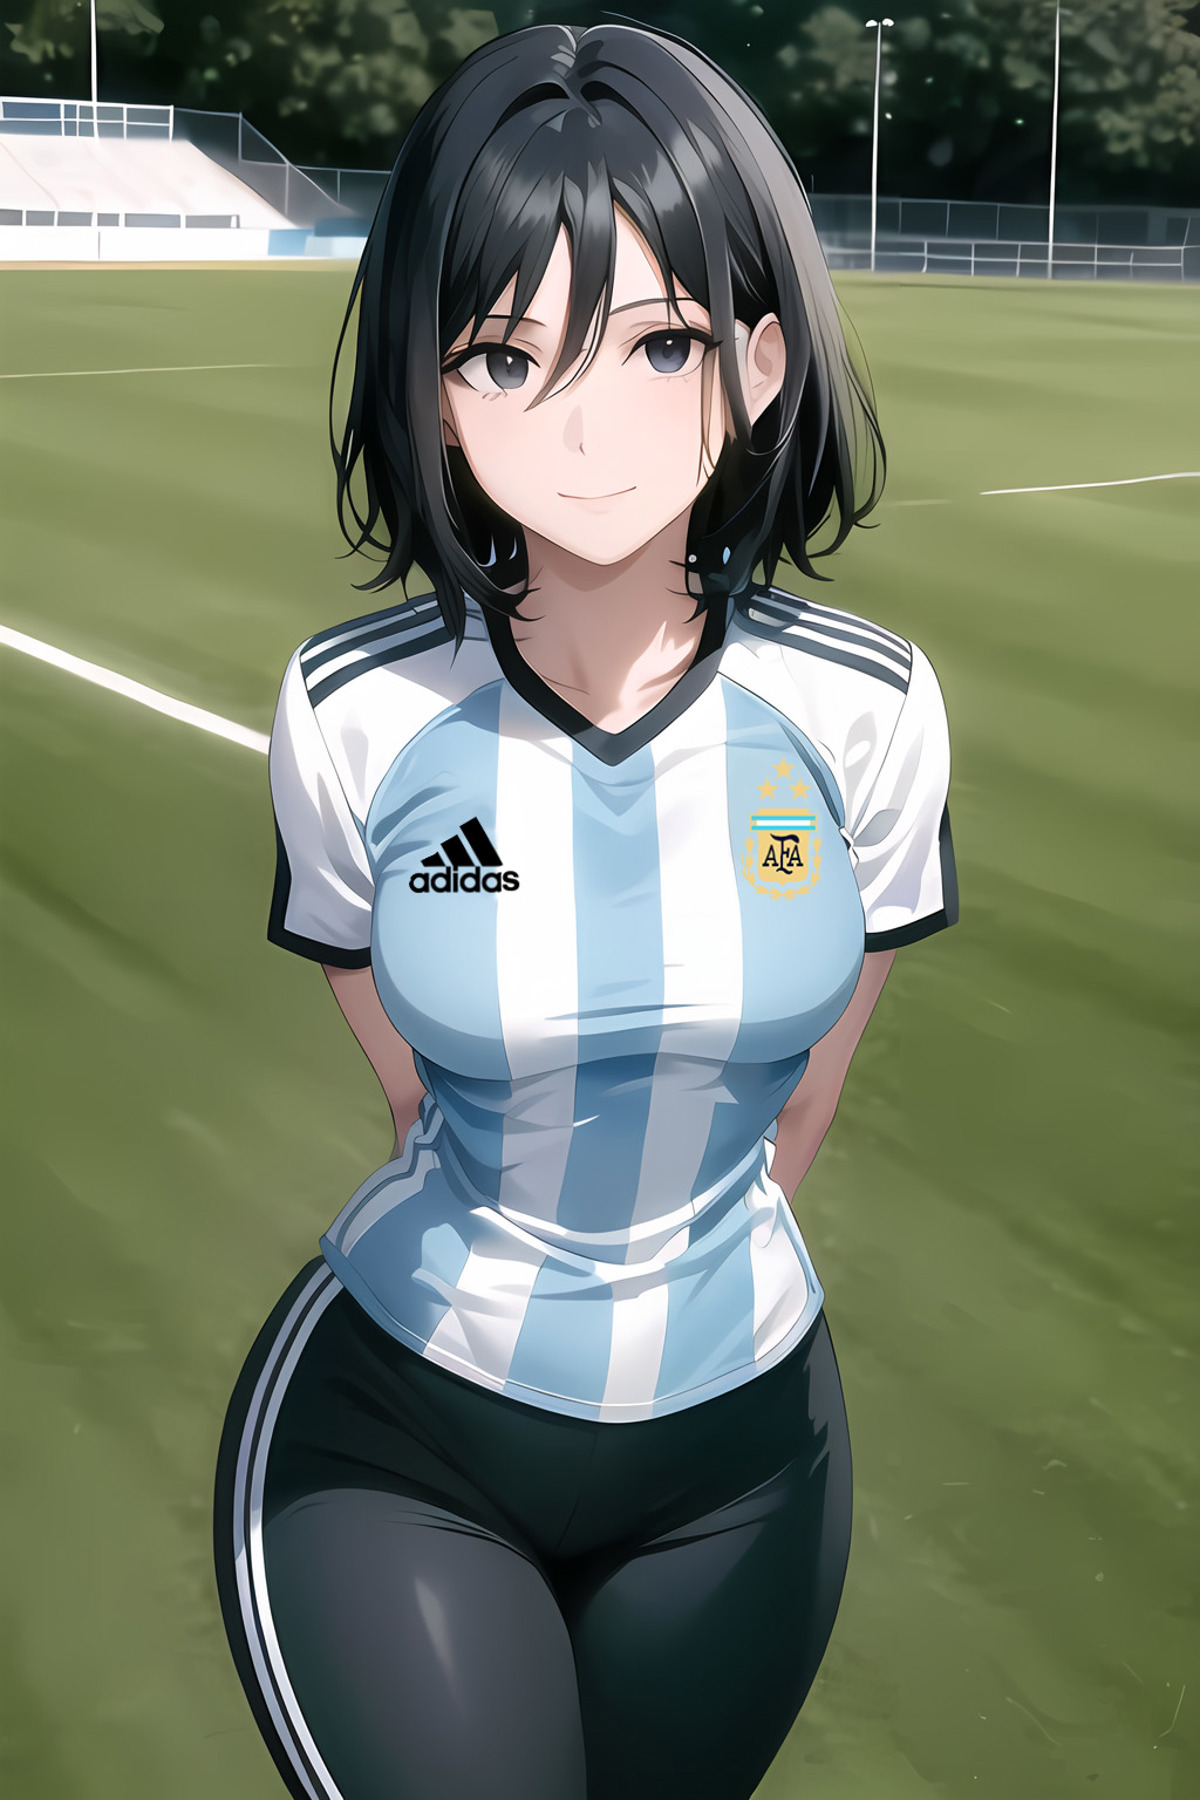 Argentina - Sportswear, Football / Soccer Uniform, Lingerie and more types of clothing image by shogunraiden1994703